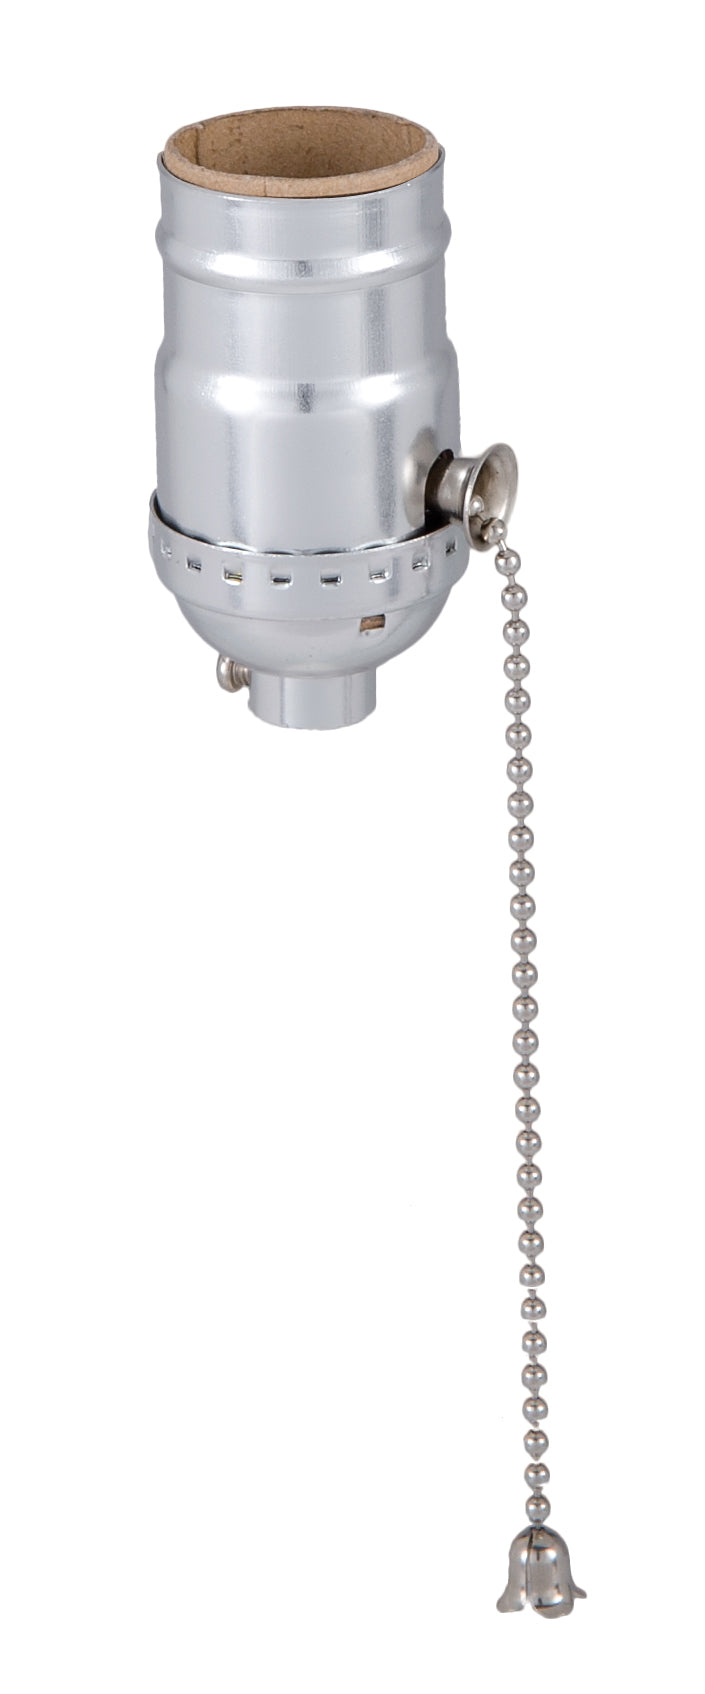 Pull Chain (On-Off) Med. Base Lamp Socket with Nickel finish